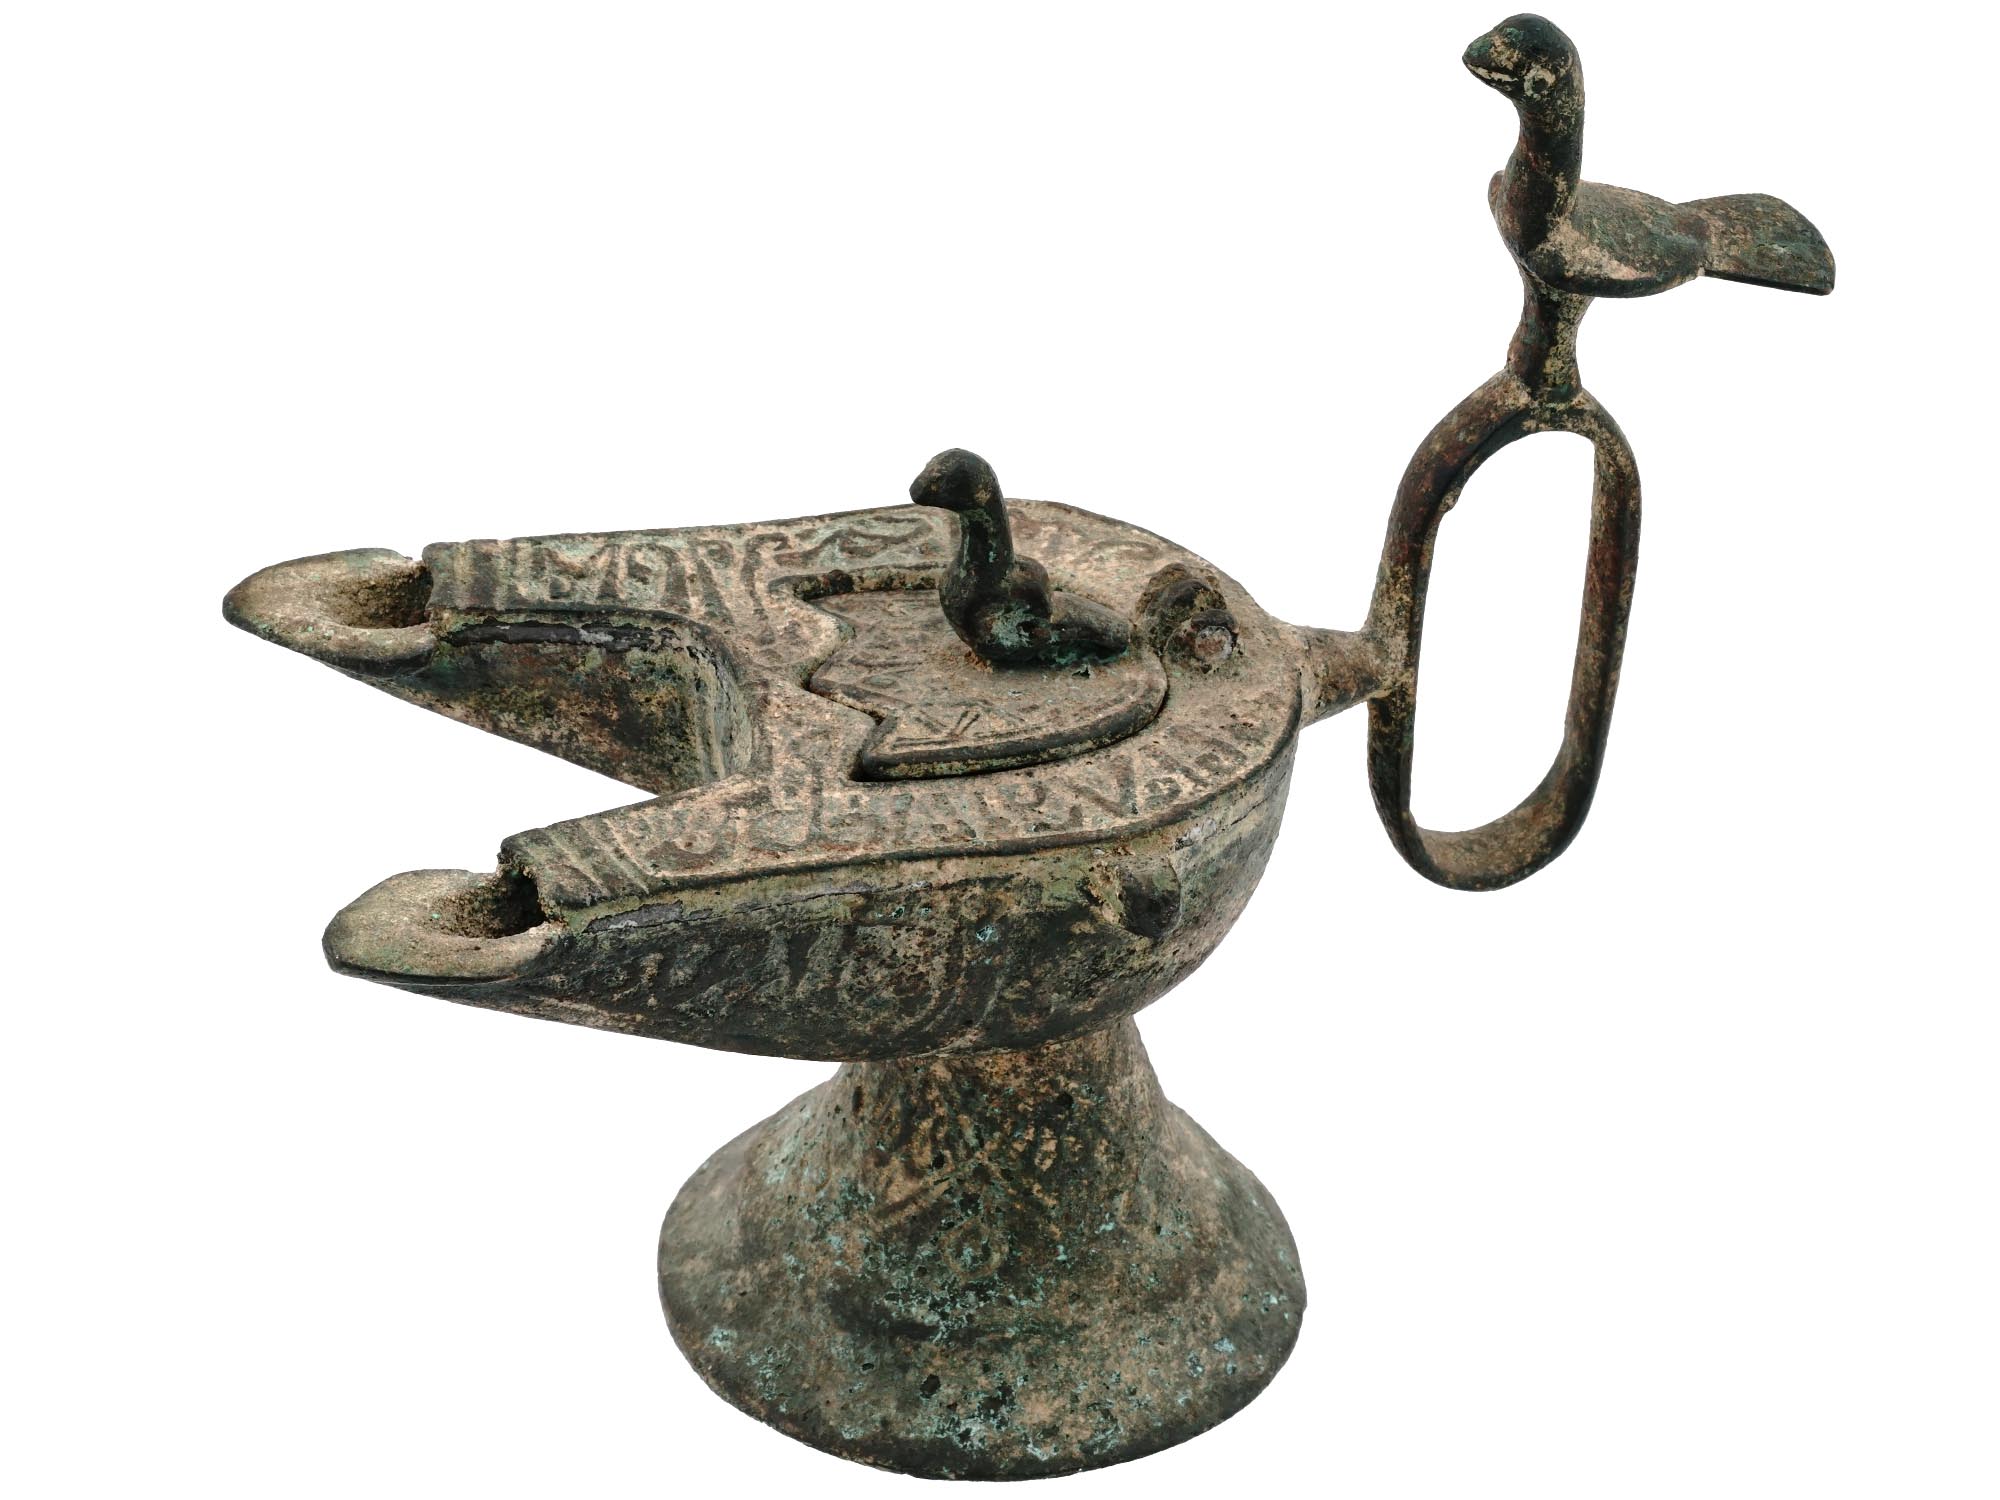 ANTIQUE ISLAMIC DOUBLE WICKED BRONZE OIL LAMP PIC-0